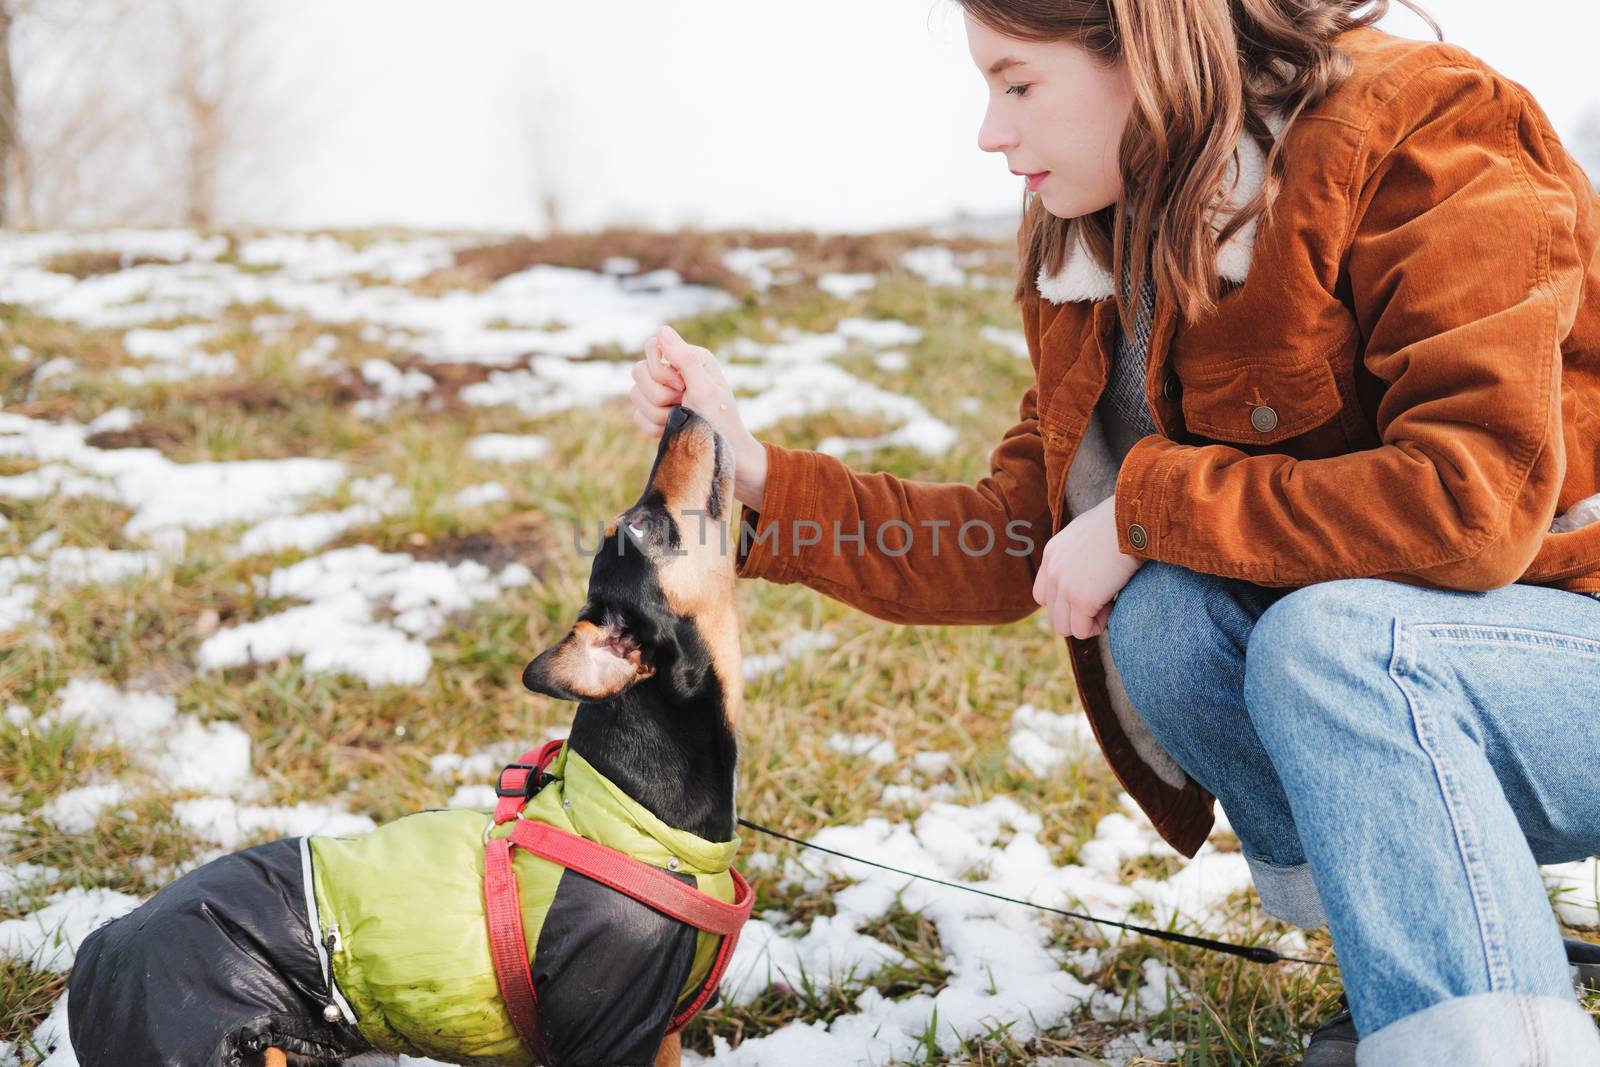 Female person and a dachshund at walk. Spending time with a dog outdoors